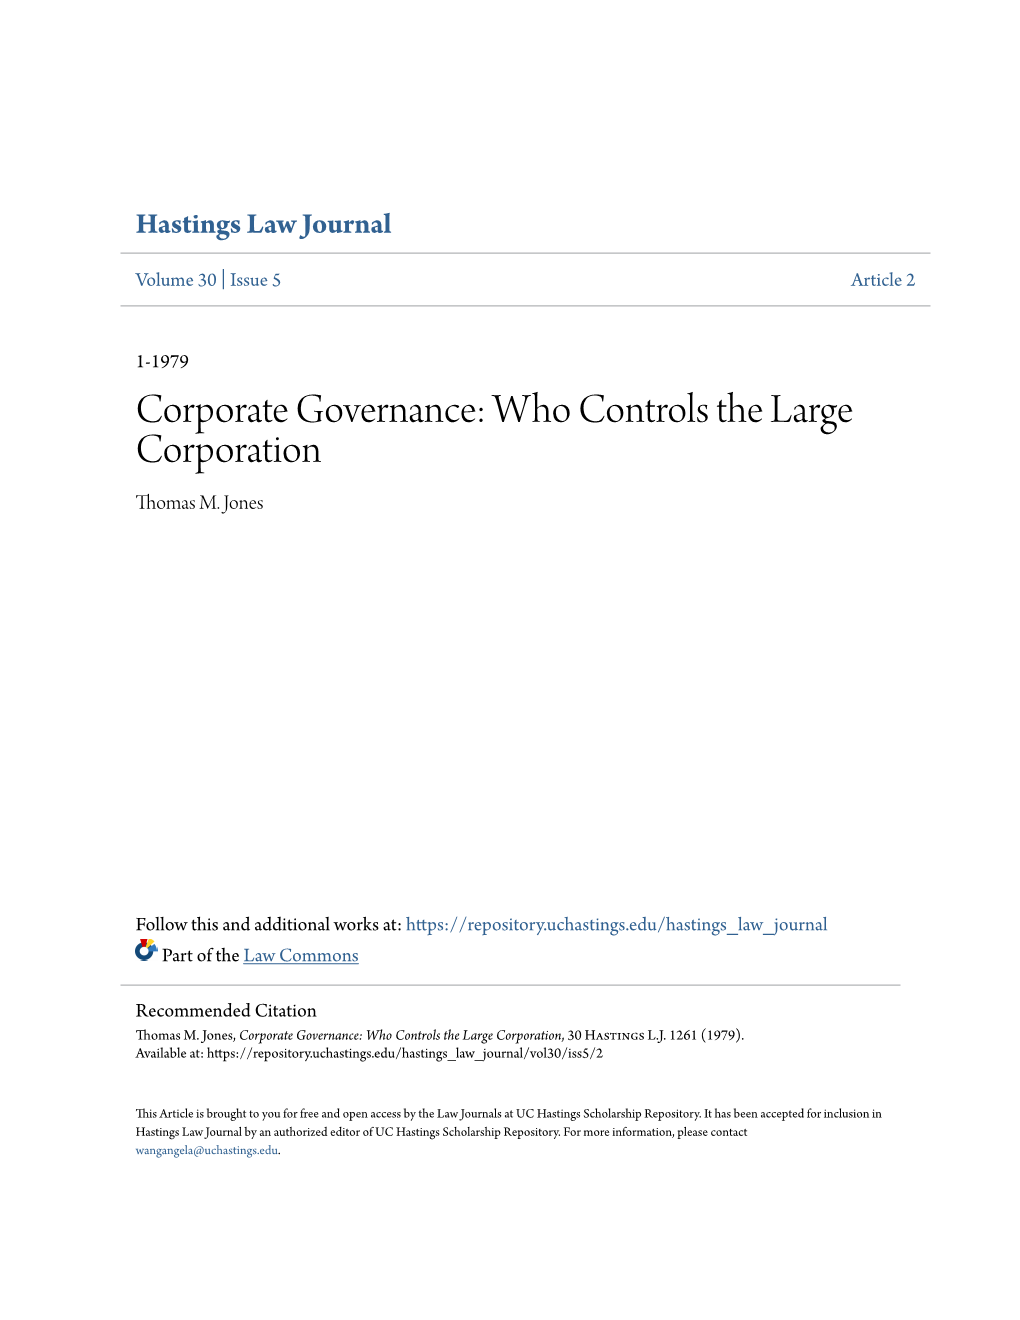 Corporate Governance: Who Controls the Large Corporation Thomas M